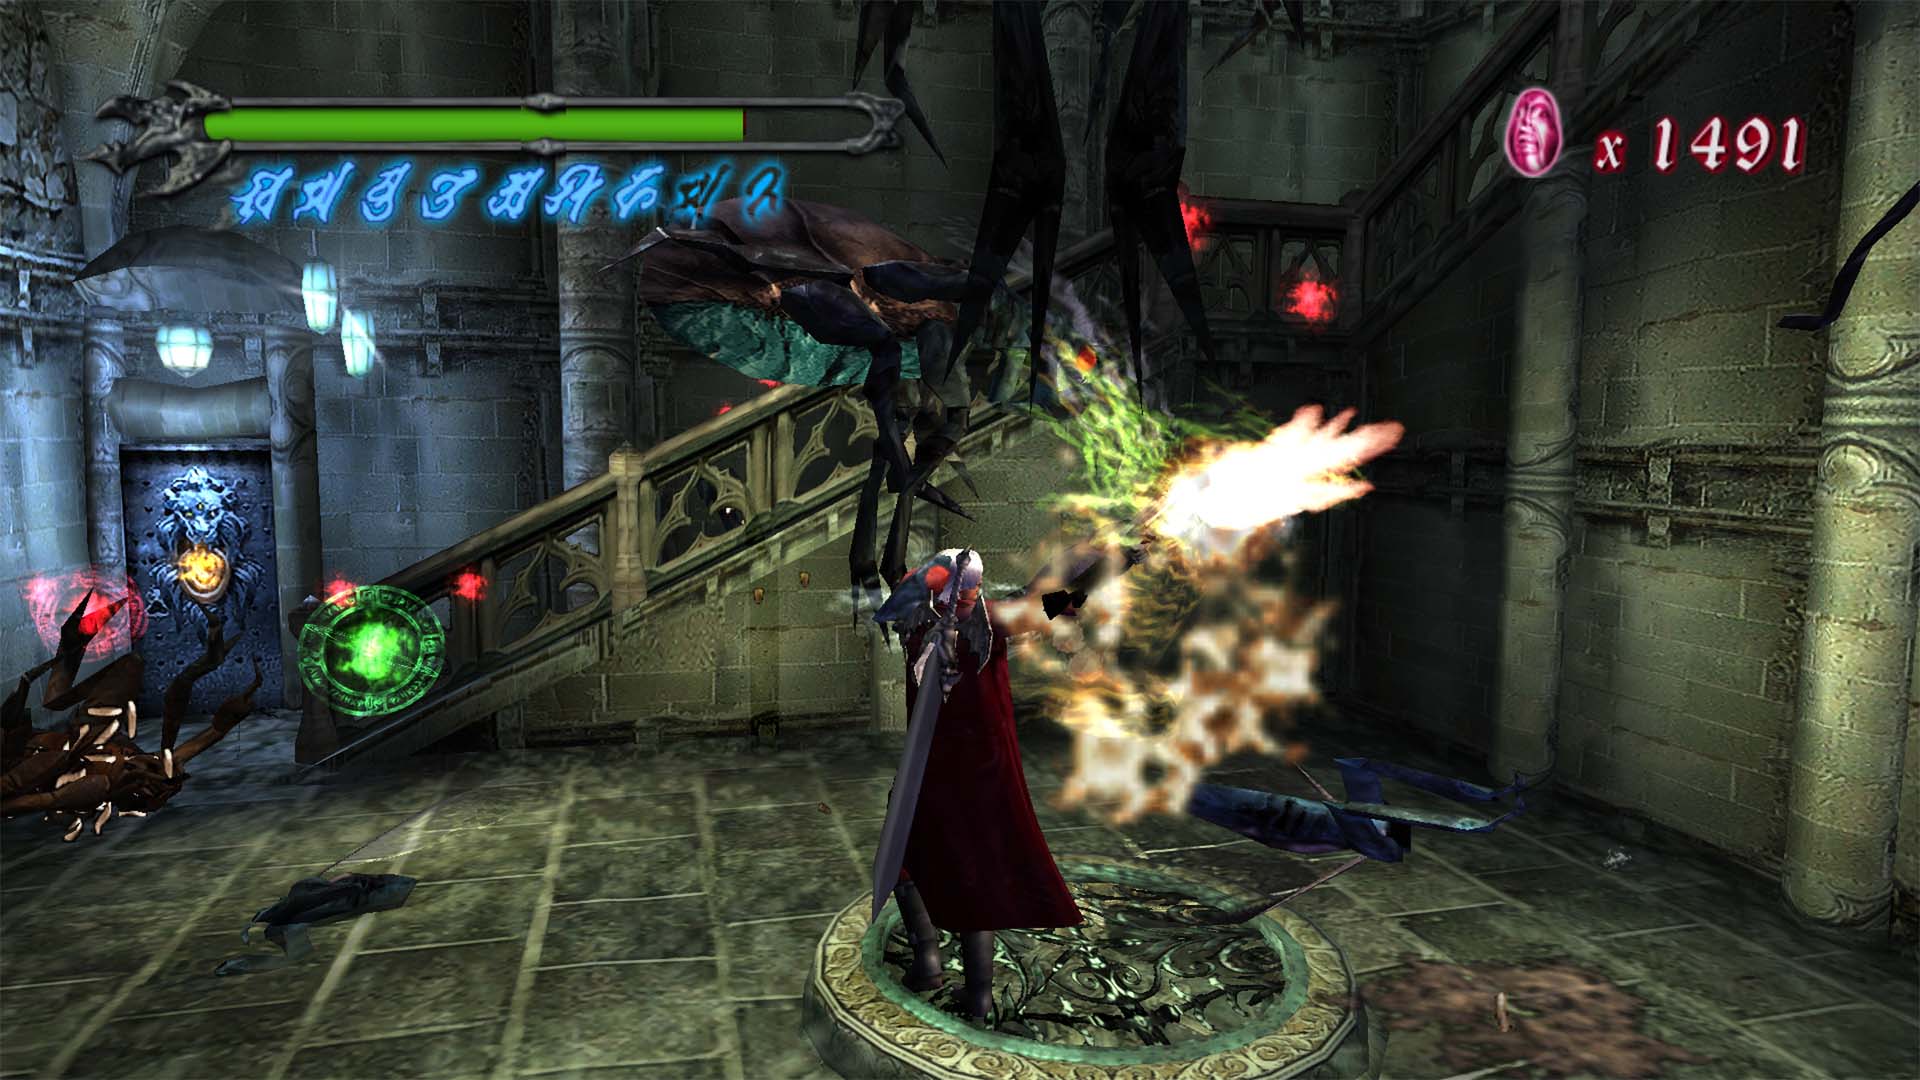 A Newcomer's Perspective of Devil May Cry — Part 1, by E Parker, MediaMastery